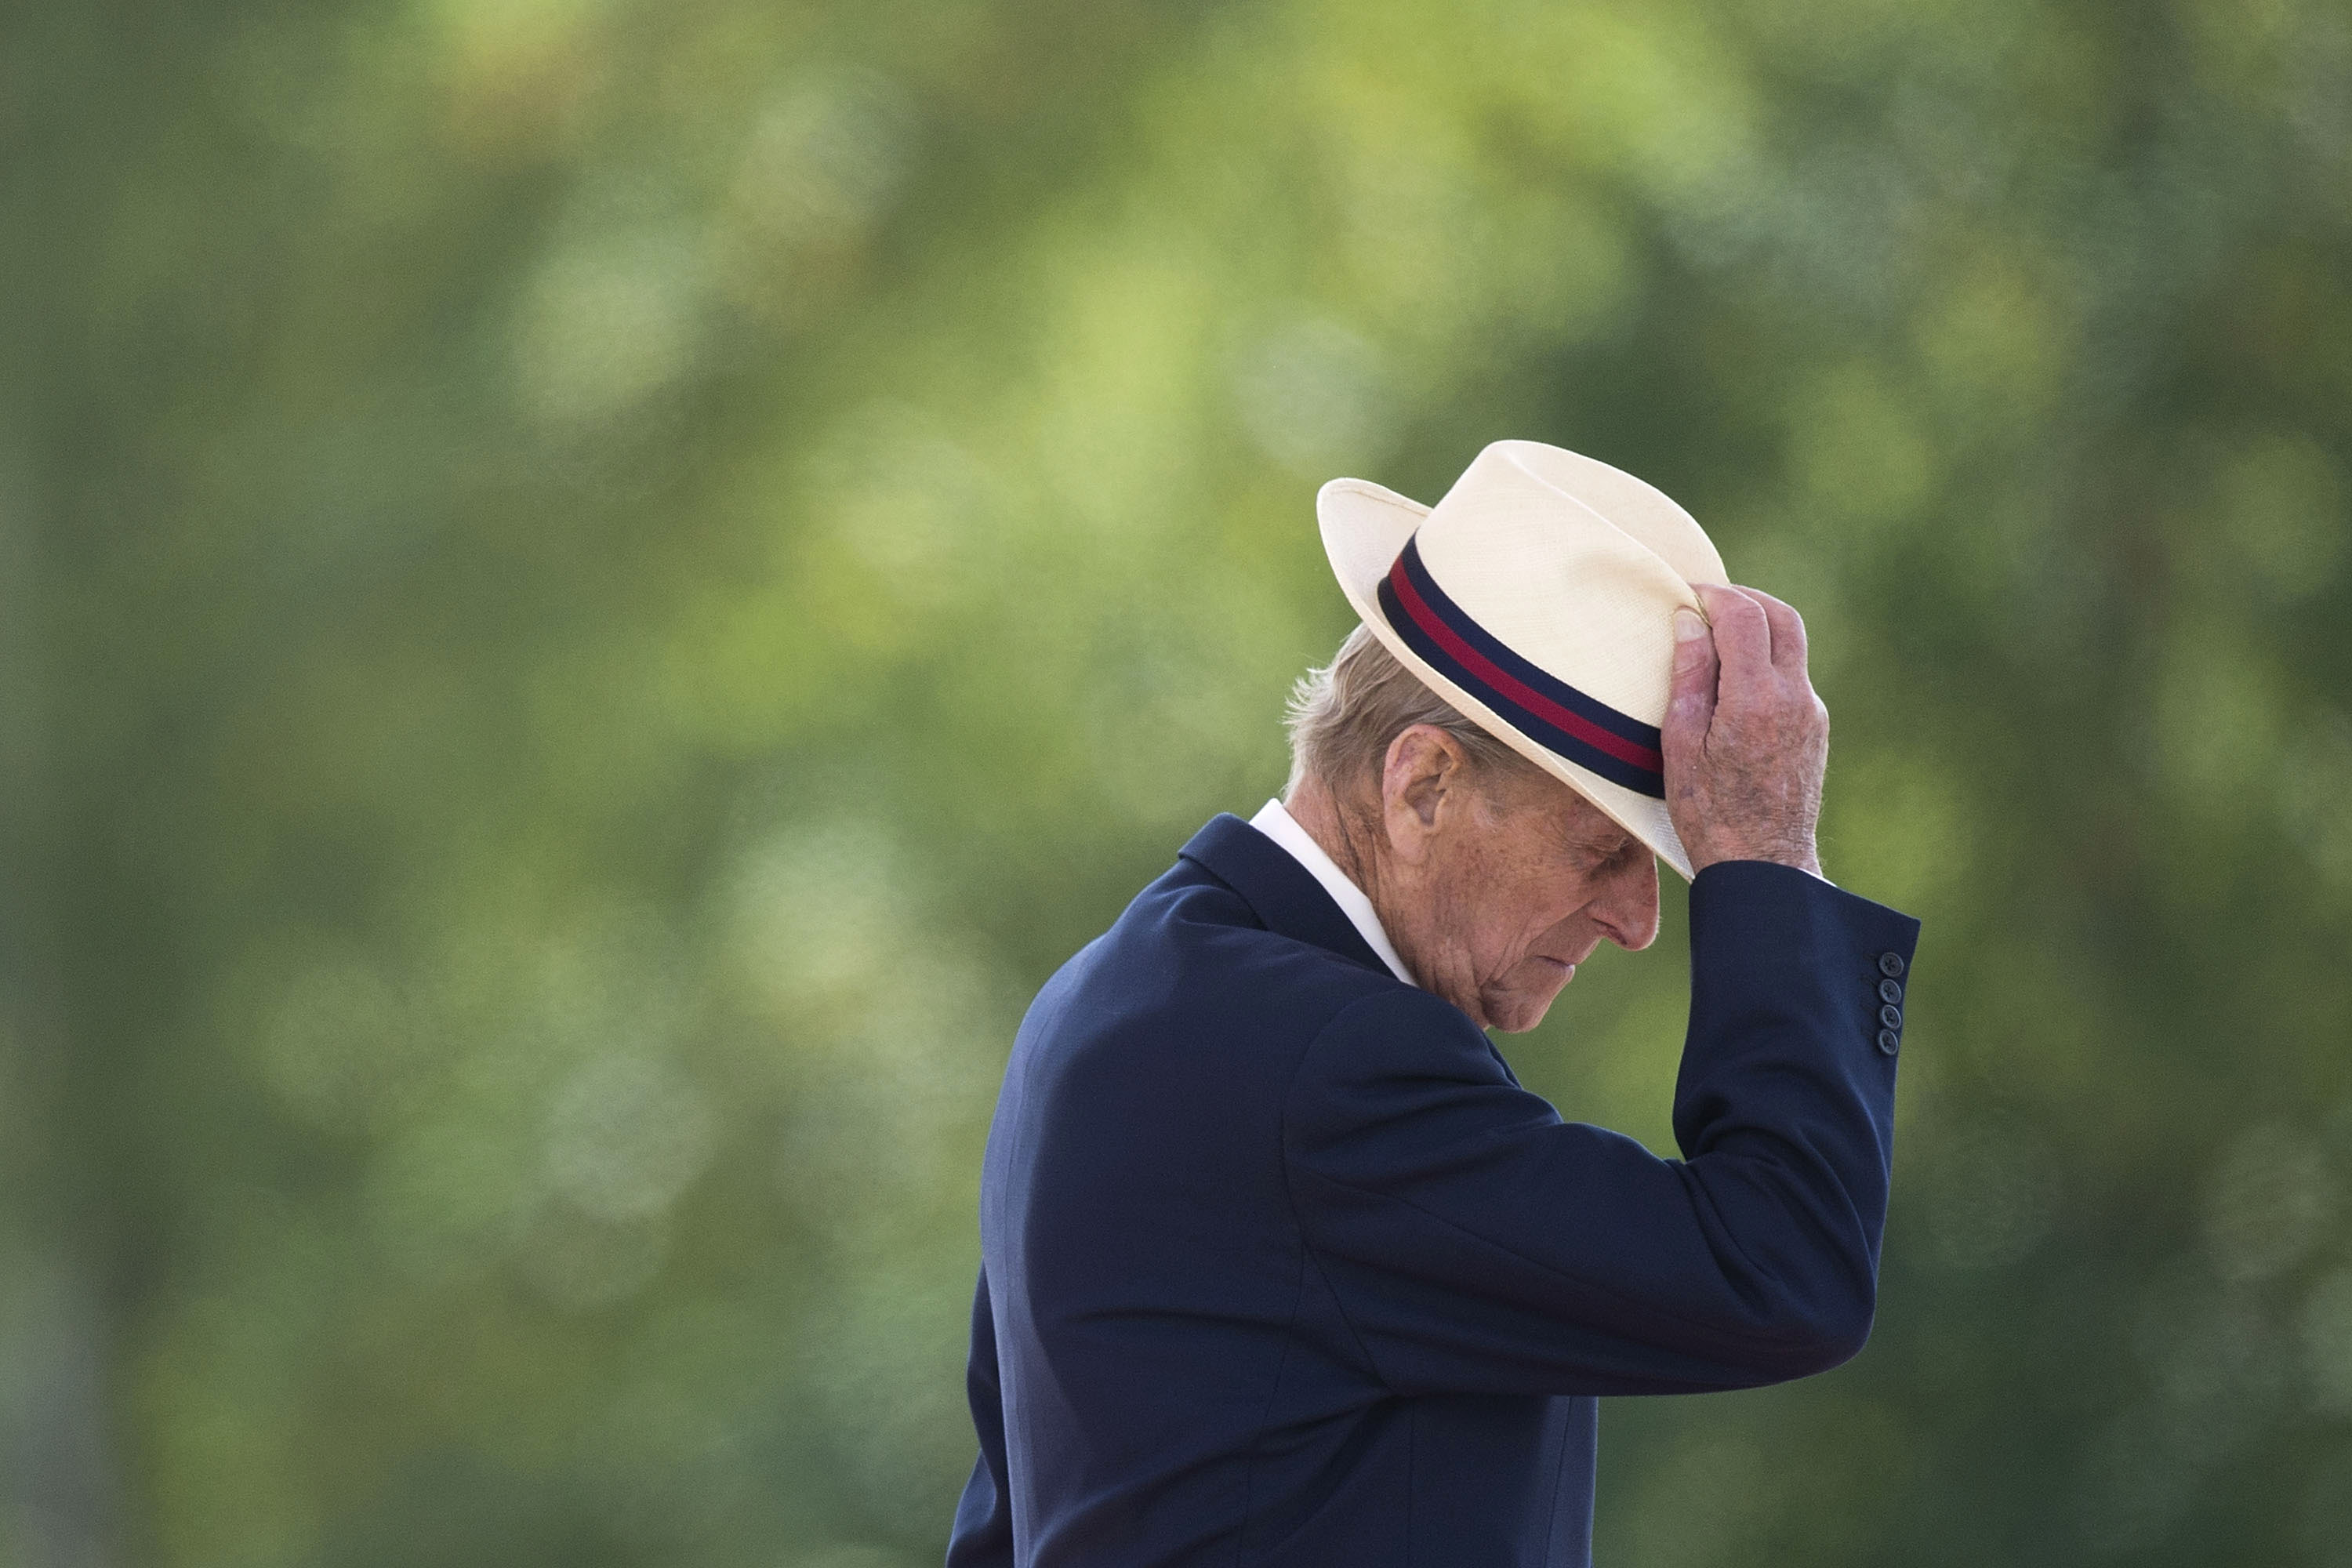 Prince Philip touching his hat and walking away after presenting medals at event in Scotland